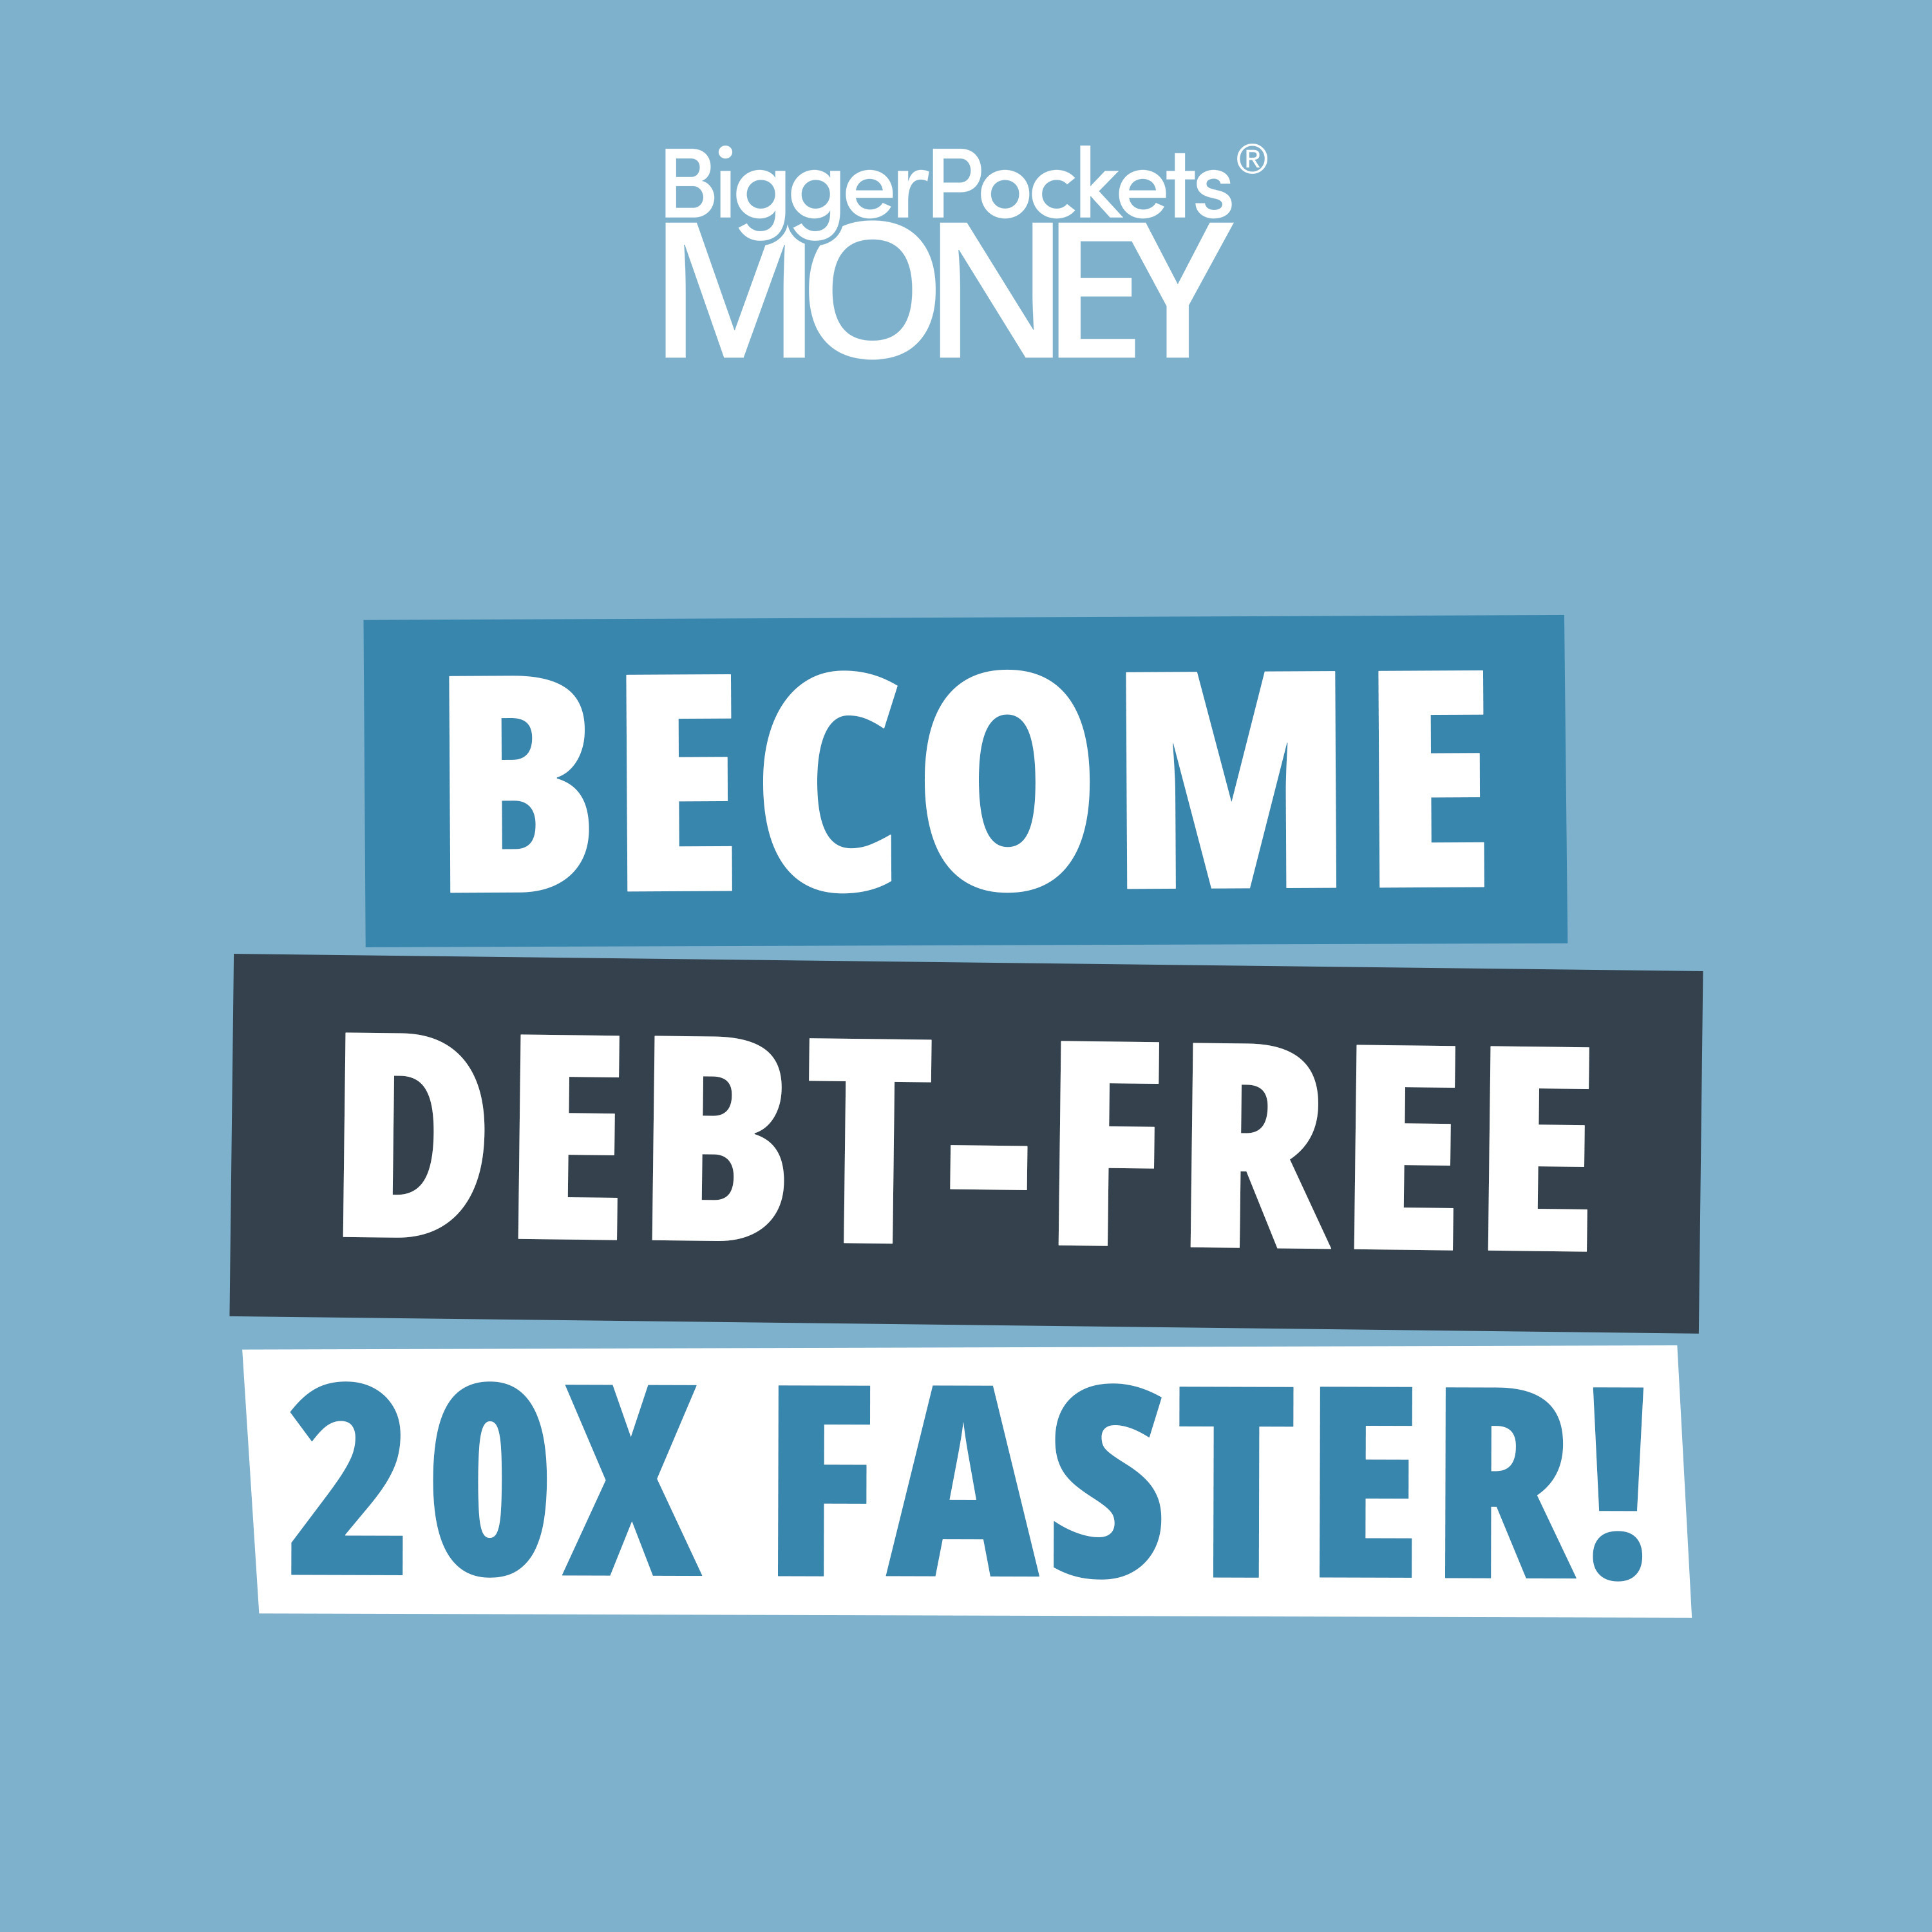 338: Finance Friday: How to Become Debt-Free 20 Years Faster Than You Thought